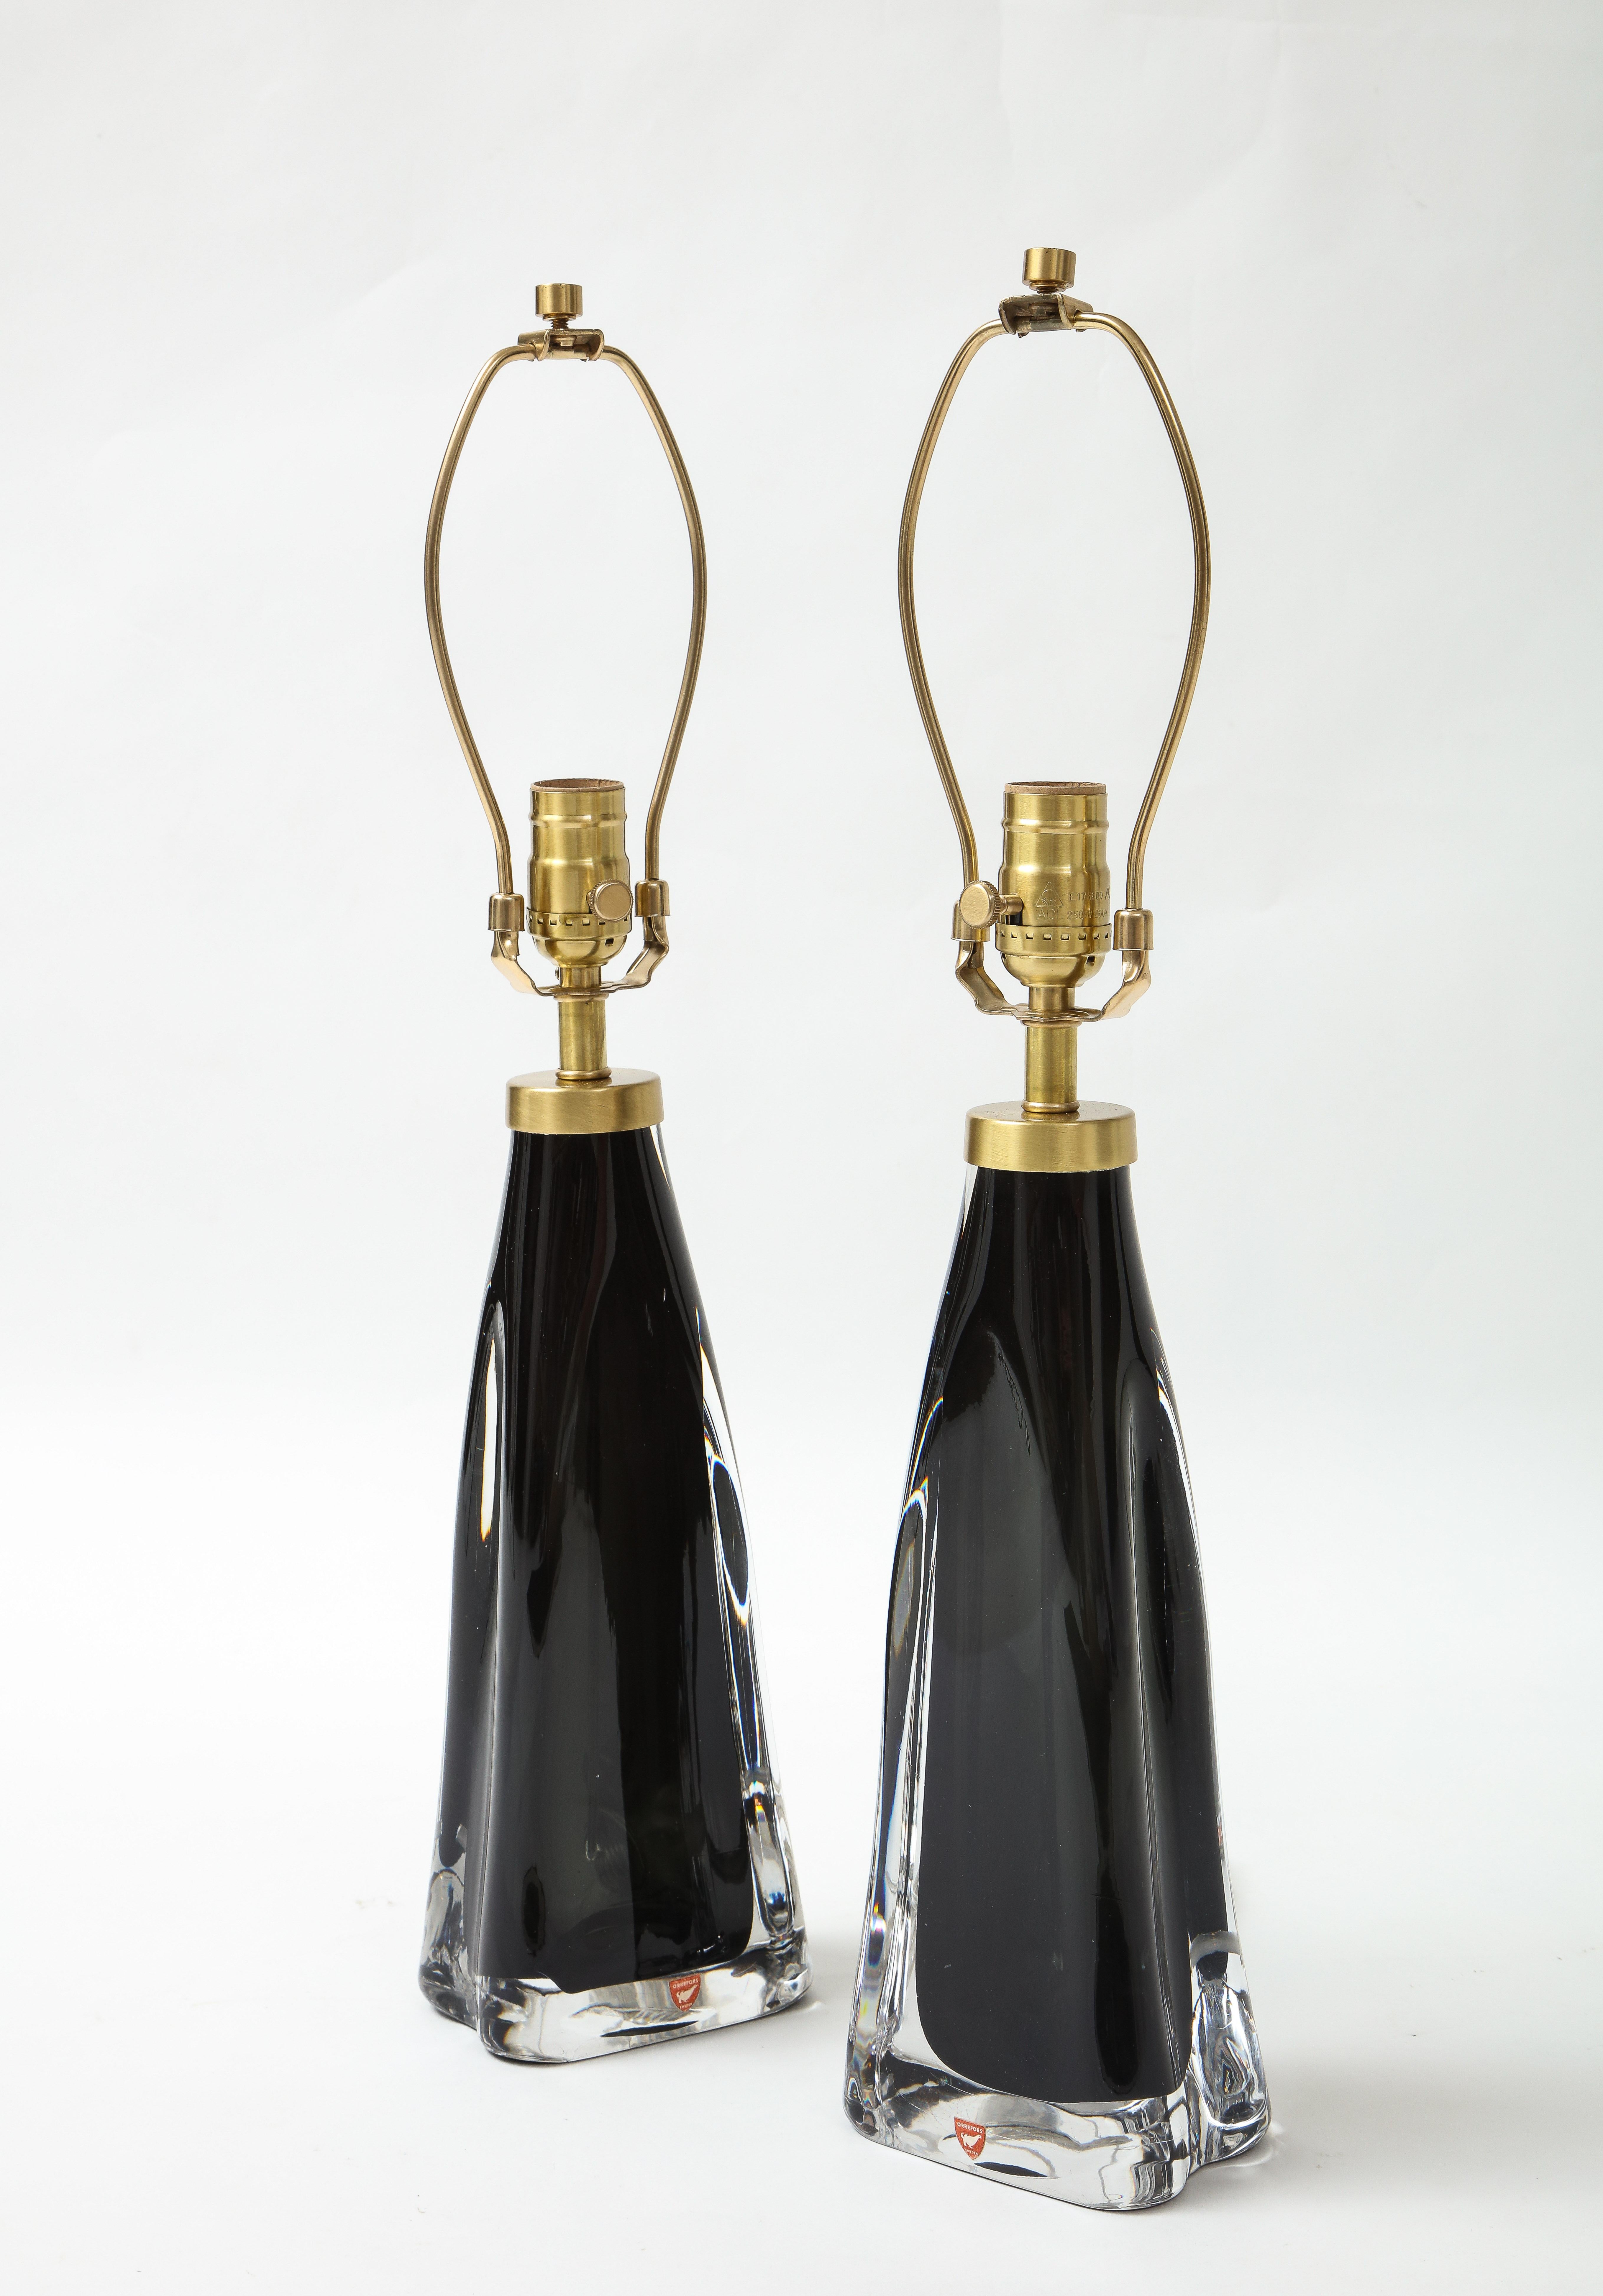 Rare pair of Orrefors black crystal lamps cased in clear crystal, this is a rare color and is seldom seen. Rewired for use in the USA with brass fittings, 100W max.